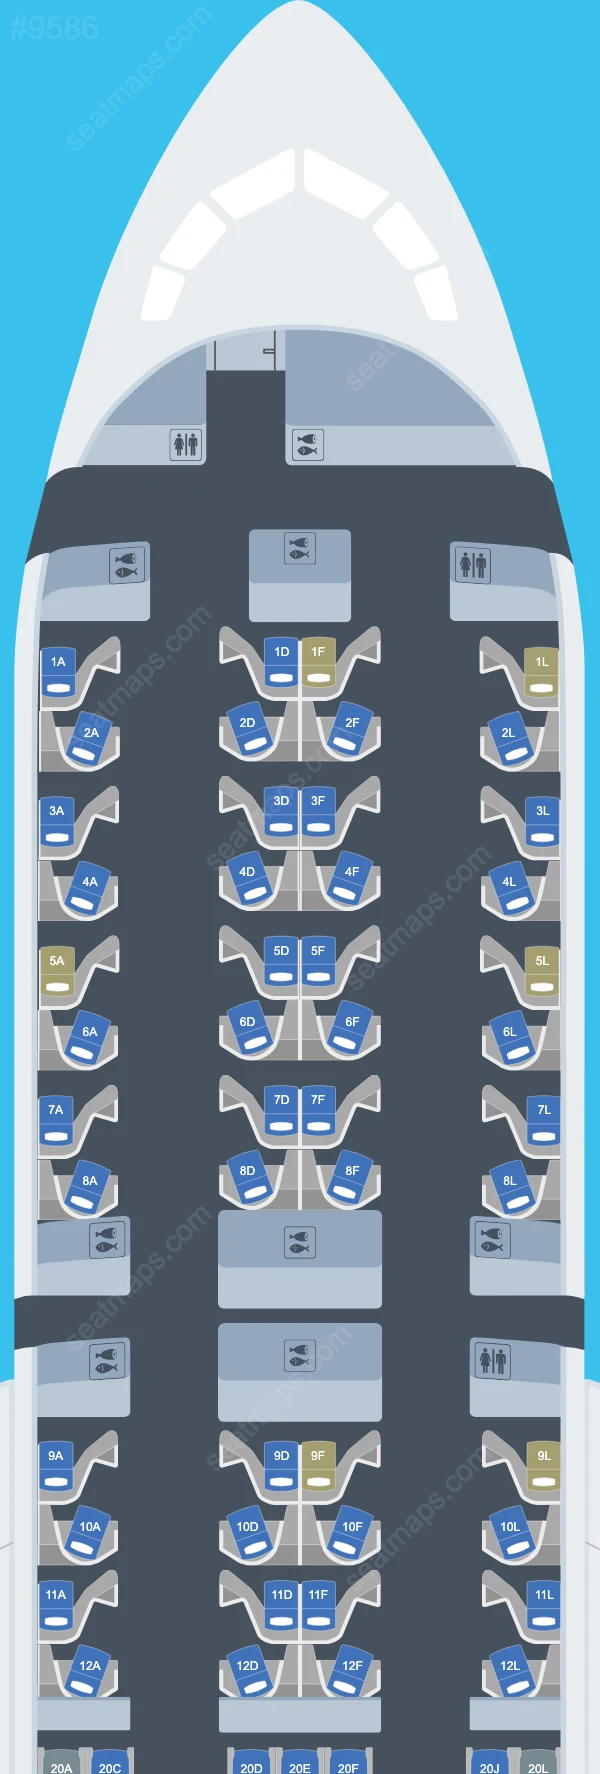 United Boeing 787-9 V.1 seatmap mobile preview